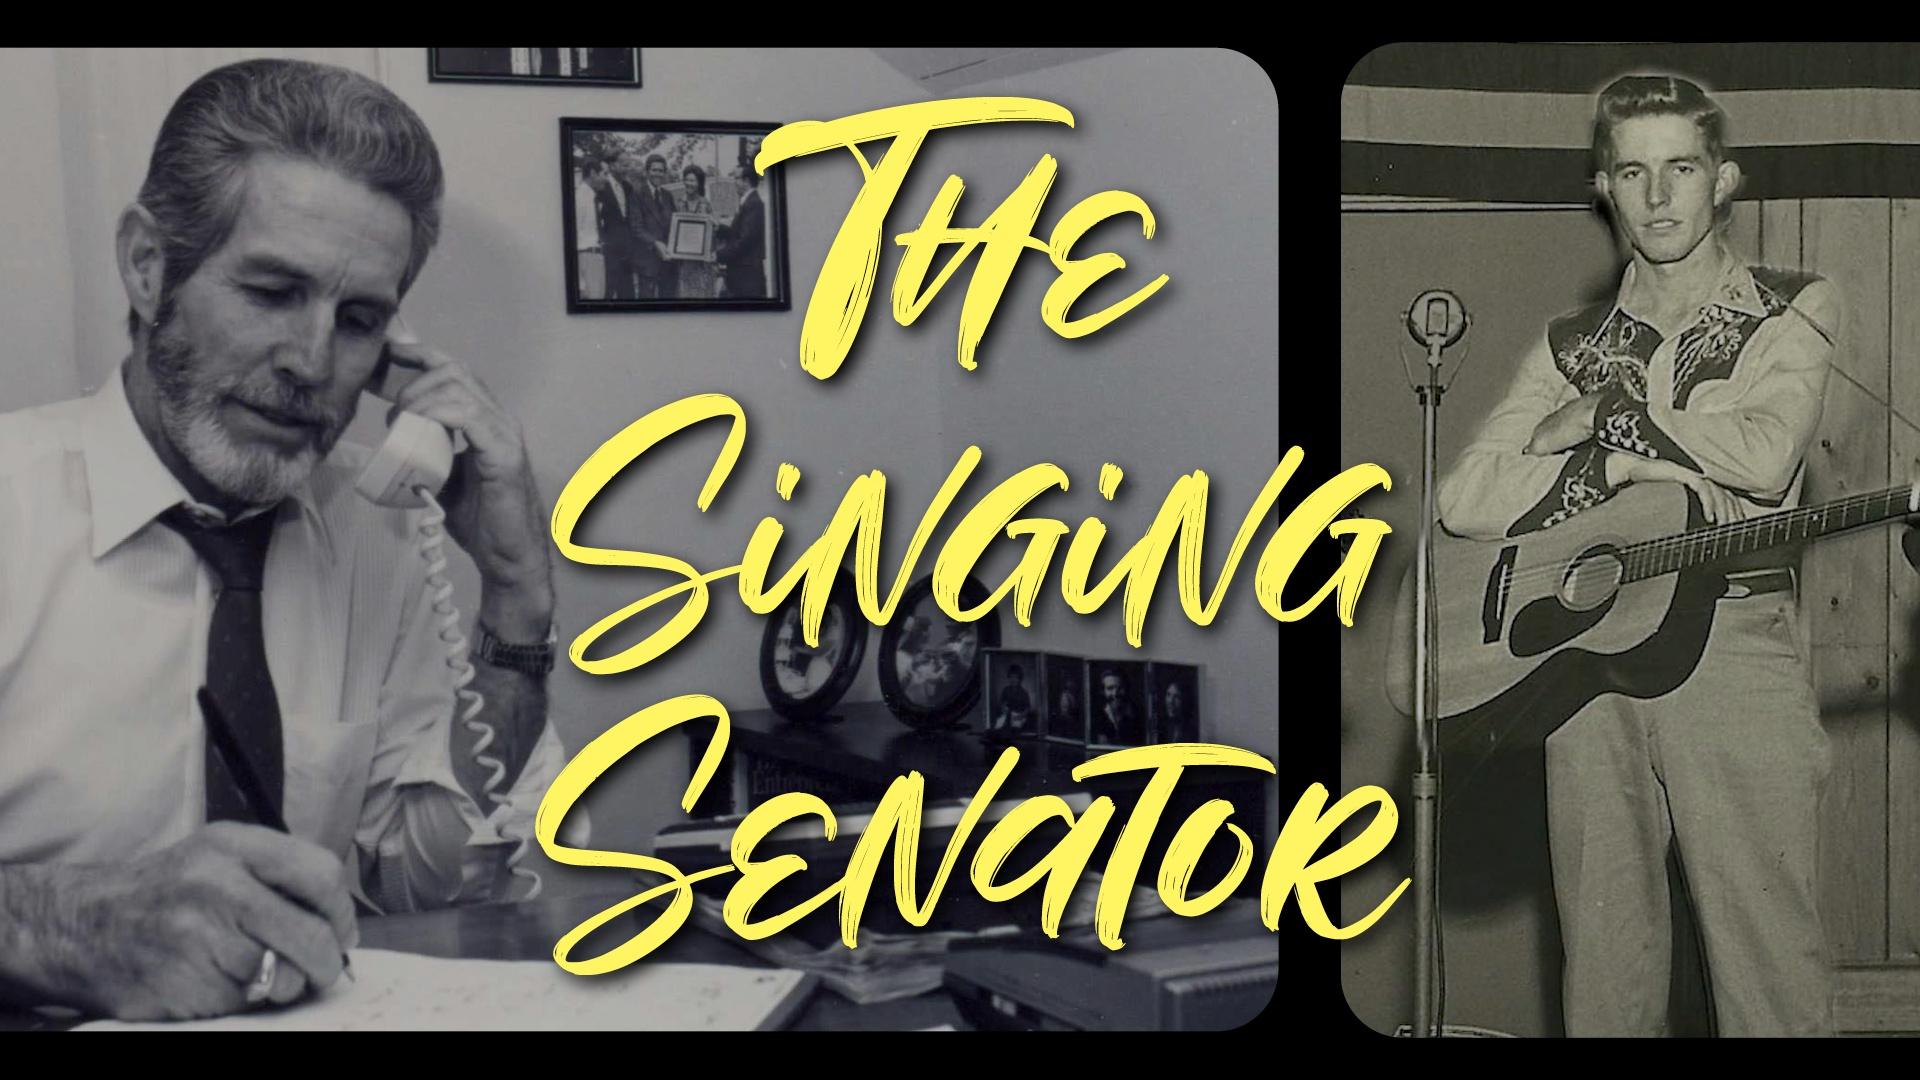 Images of Charlie Albertson with yellow text spelling out, "The Singing Senator."